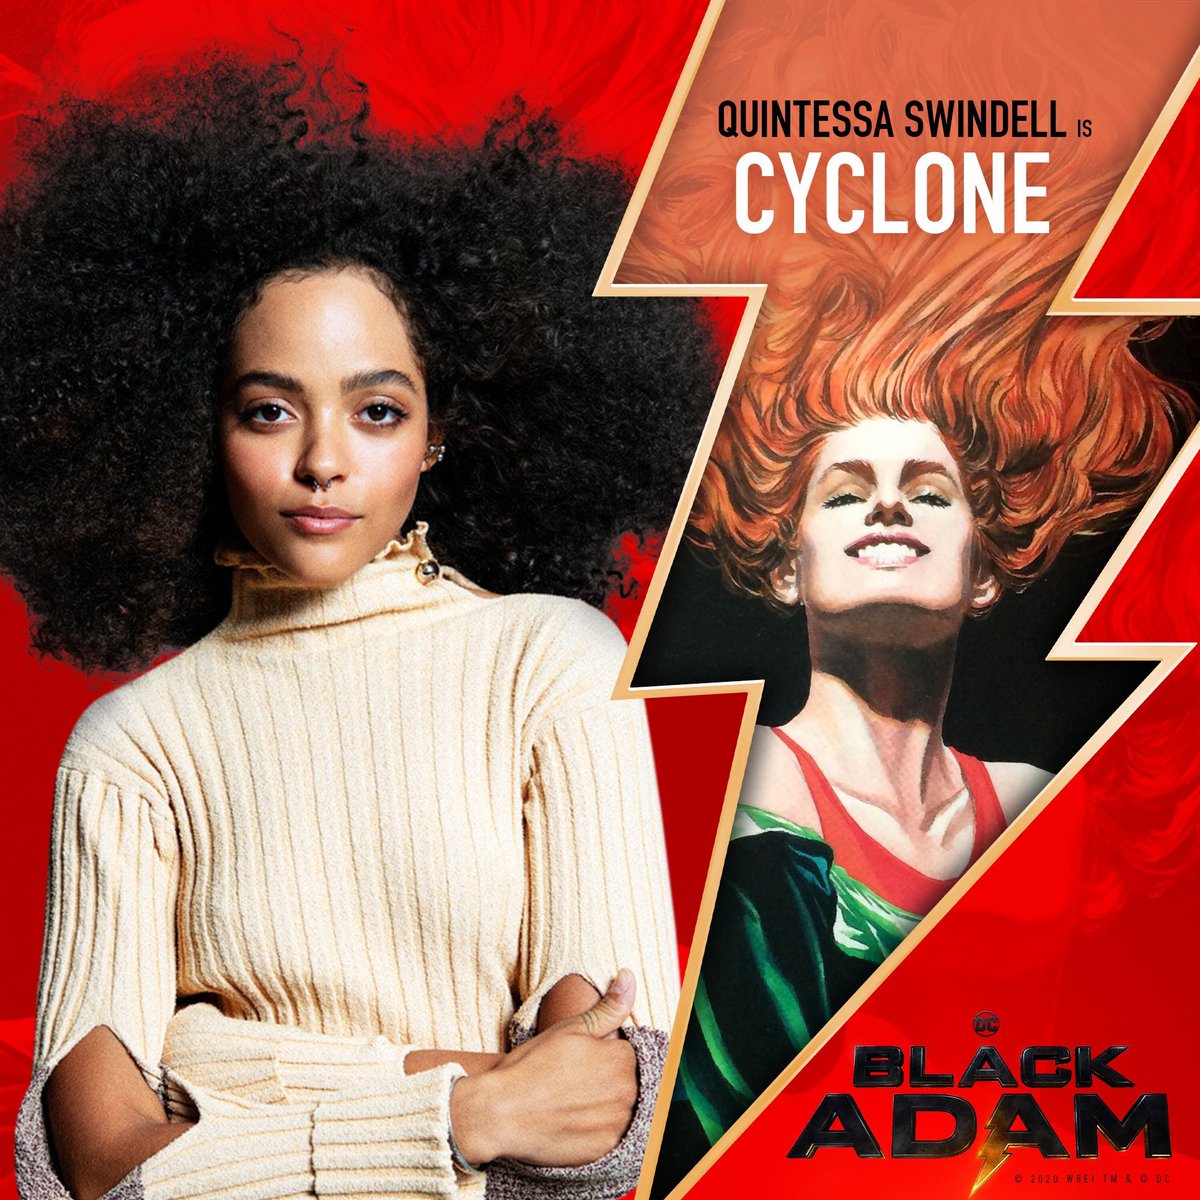 The #BlackAdam movie, which production has been delayed to start at SPRING 2021, has just cast  #QuintessaSwindell as #Cyclone, the character that kinda replaced #Hawkgirl in the script due unknown reasons. 
#TheRock’s movie, previously set to DEC 22, 2021, is currently TBD.